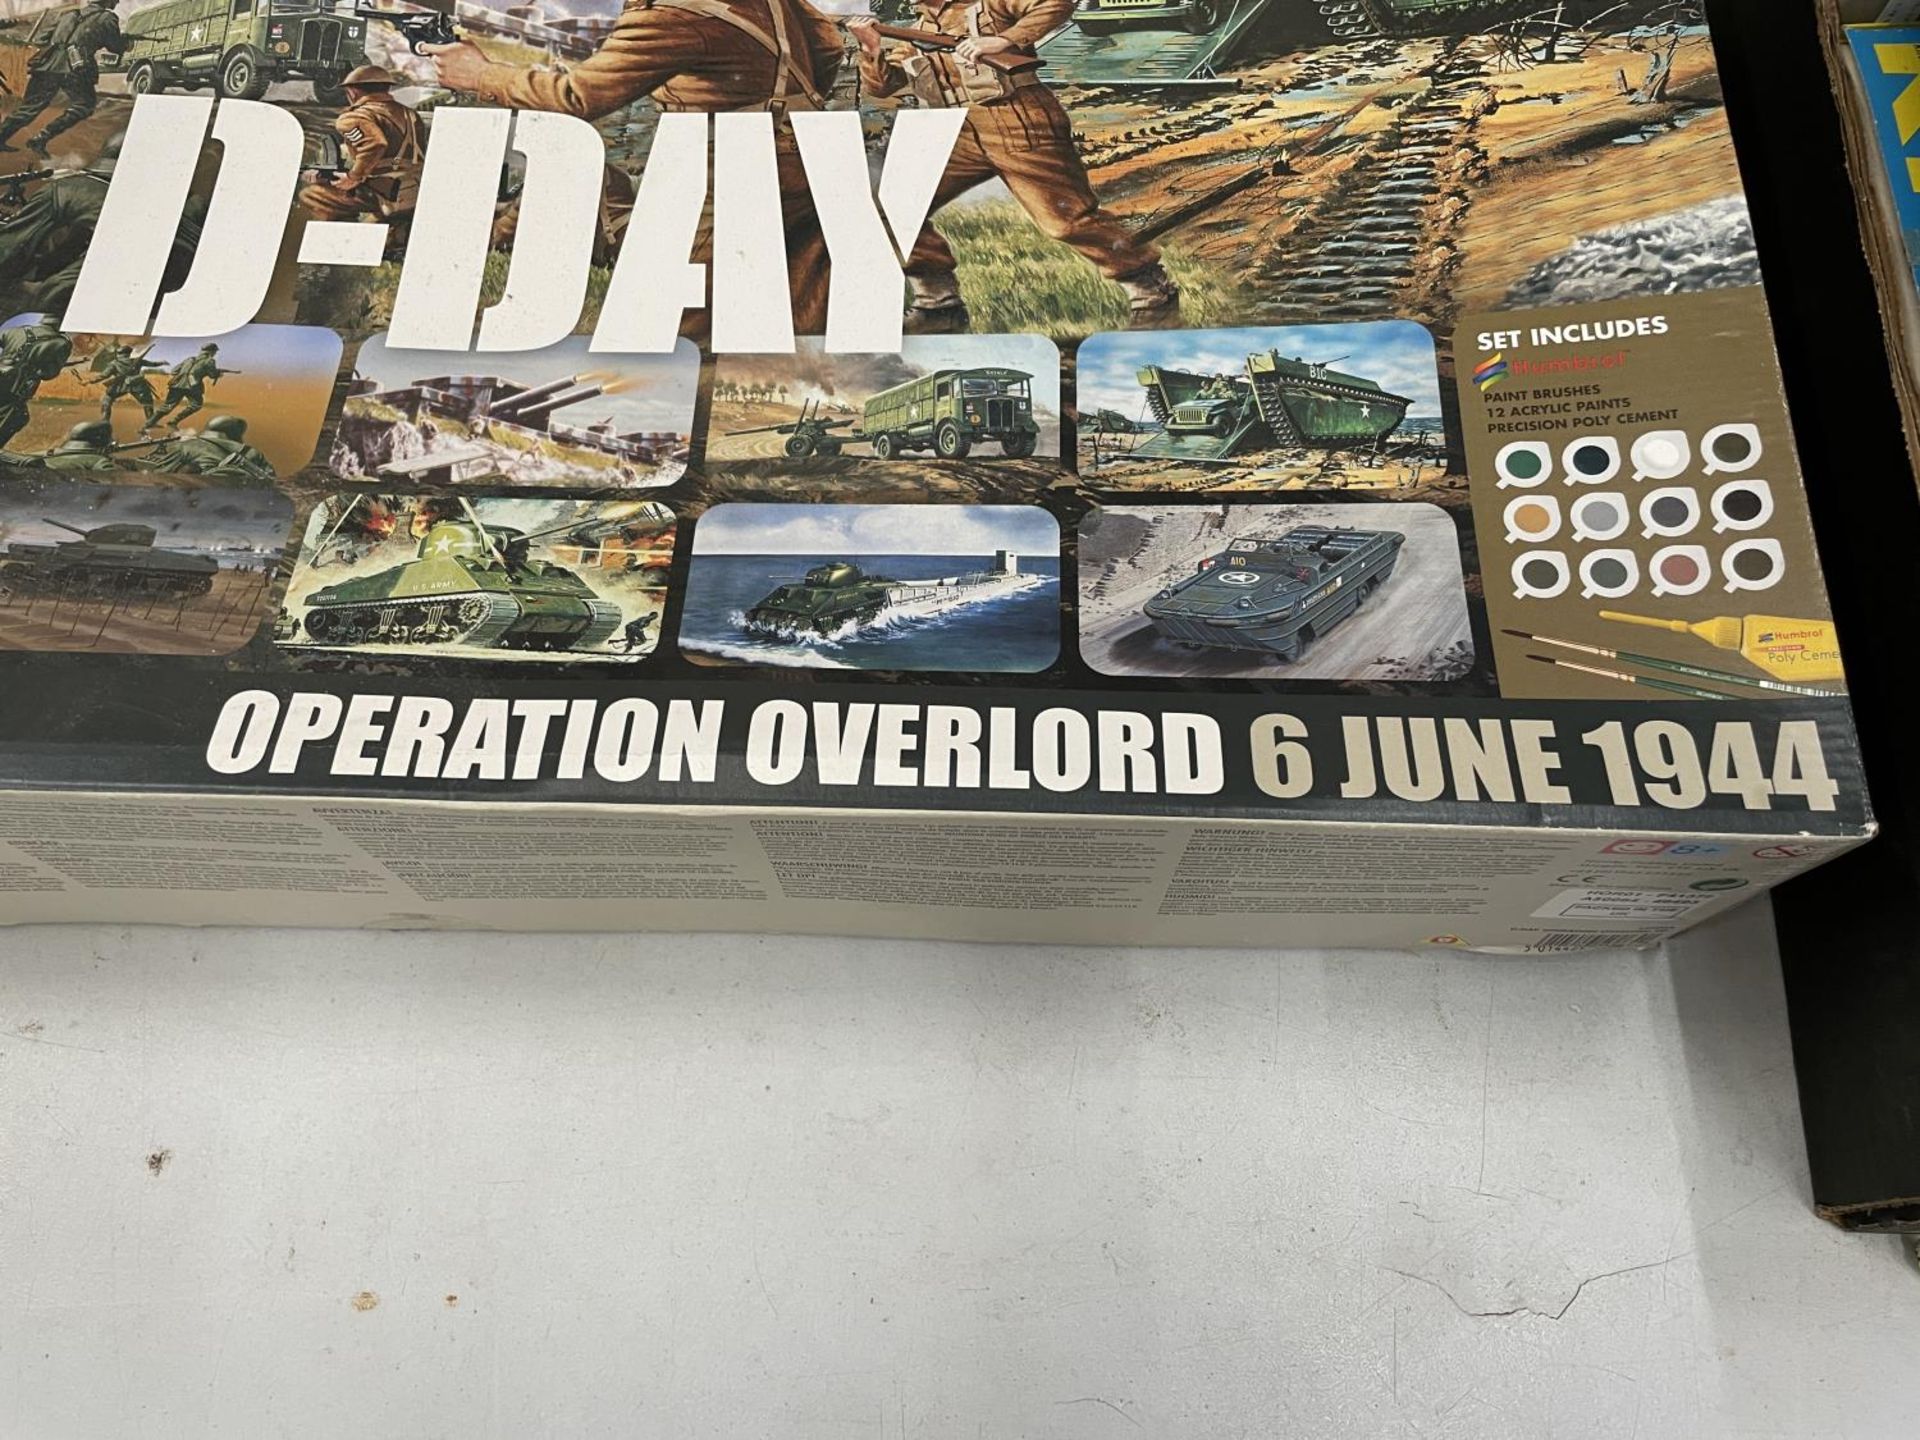 A BOXED AIRFIX D-DAY OPERATION OVERLORD 6 JUNE 1944 MODEL KIT 1:76 SCALE - Image 2 of 3